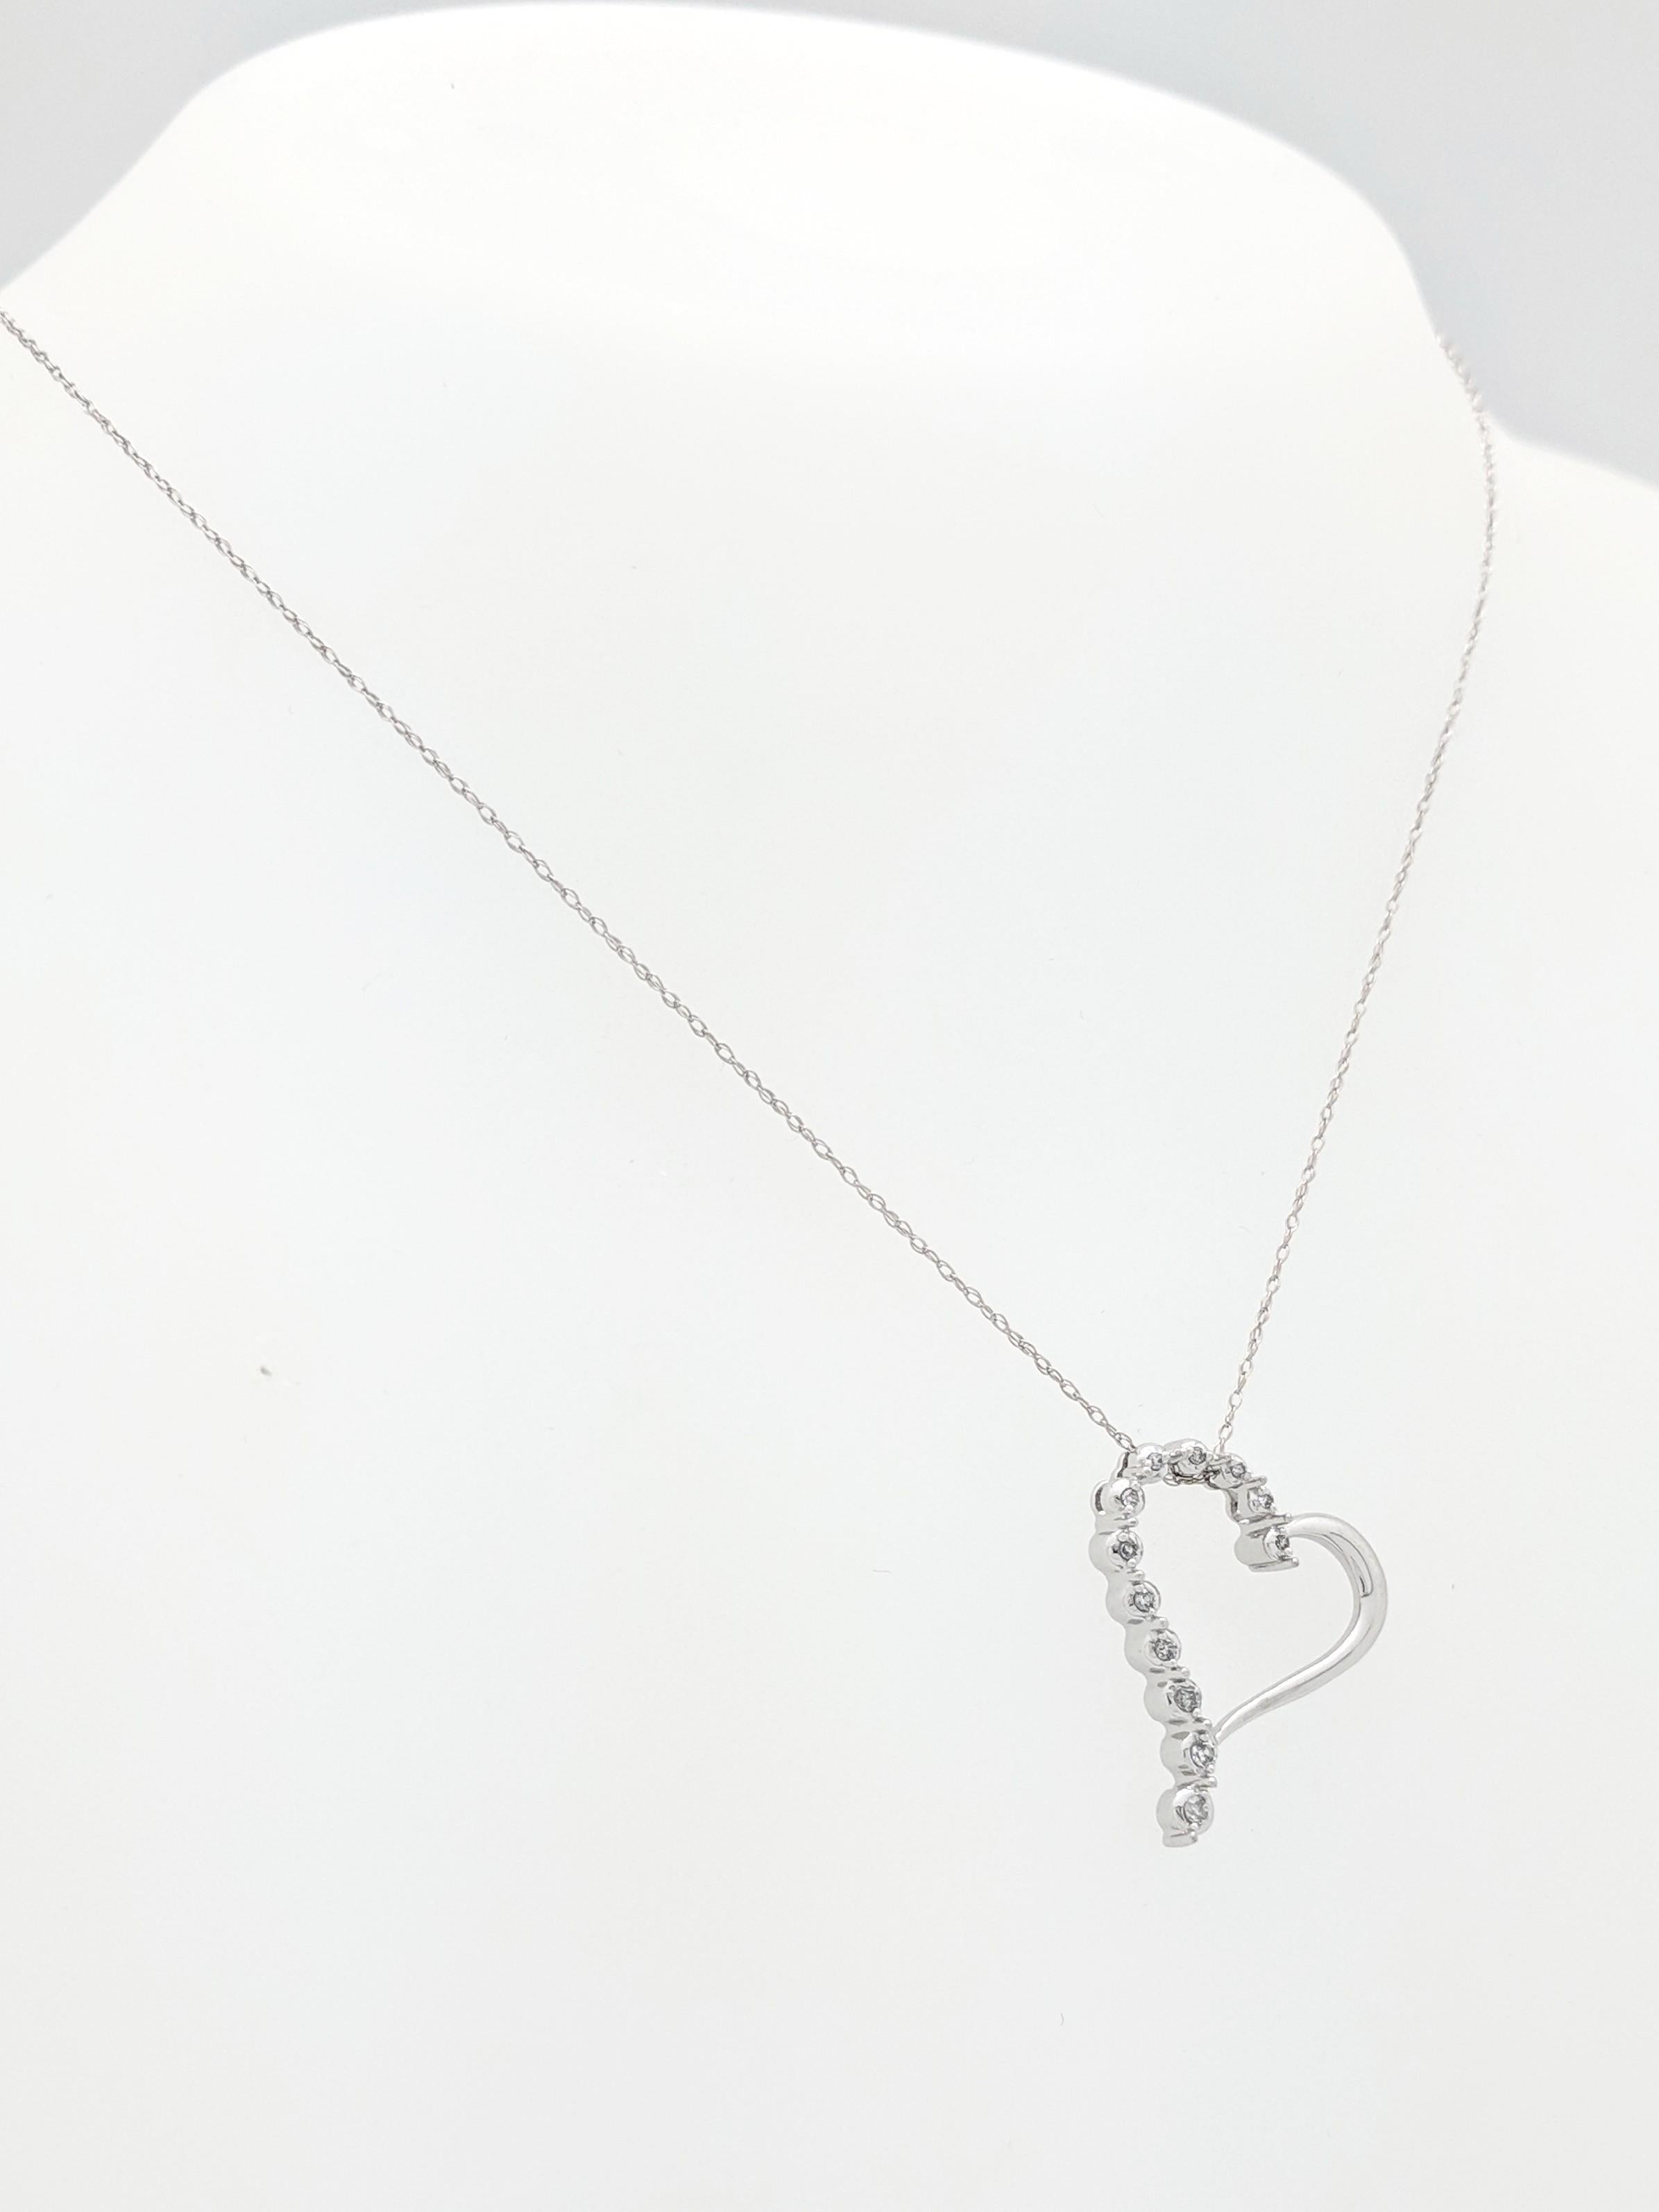 10K White Gold Diamond Heart Pendant Necklace

You are viewing a beautiful diamond heart pendant necklace. The piece is crafted from 10k white gold and weighs 2.2 gram. It features (12) natural round brilliant cut diamonds for an estimated .07ctw.